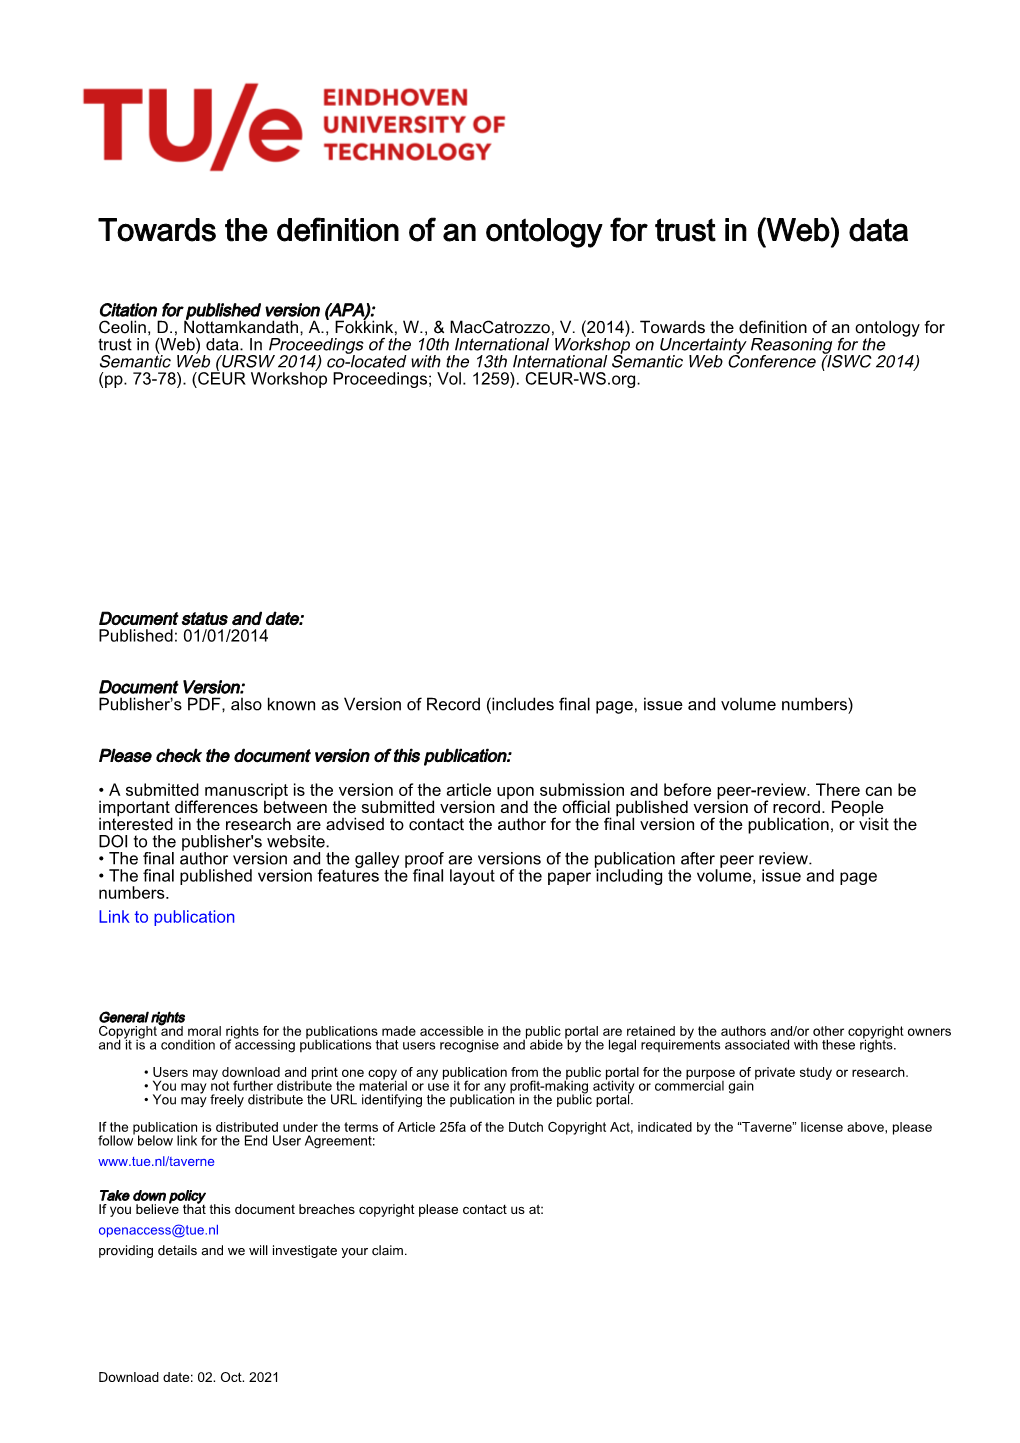 Towards the Definition of an Ontology for Trust in (Web) Data